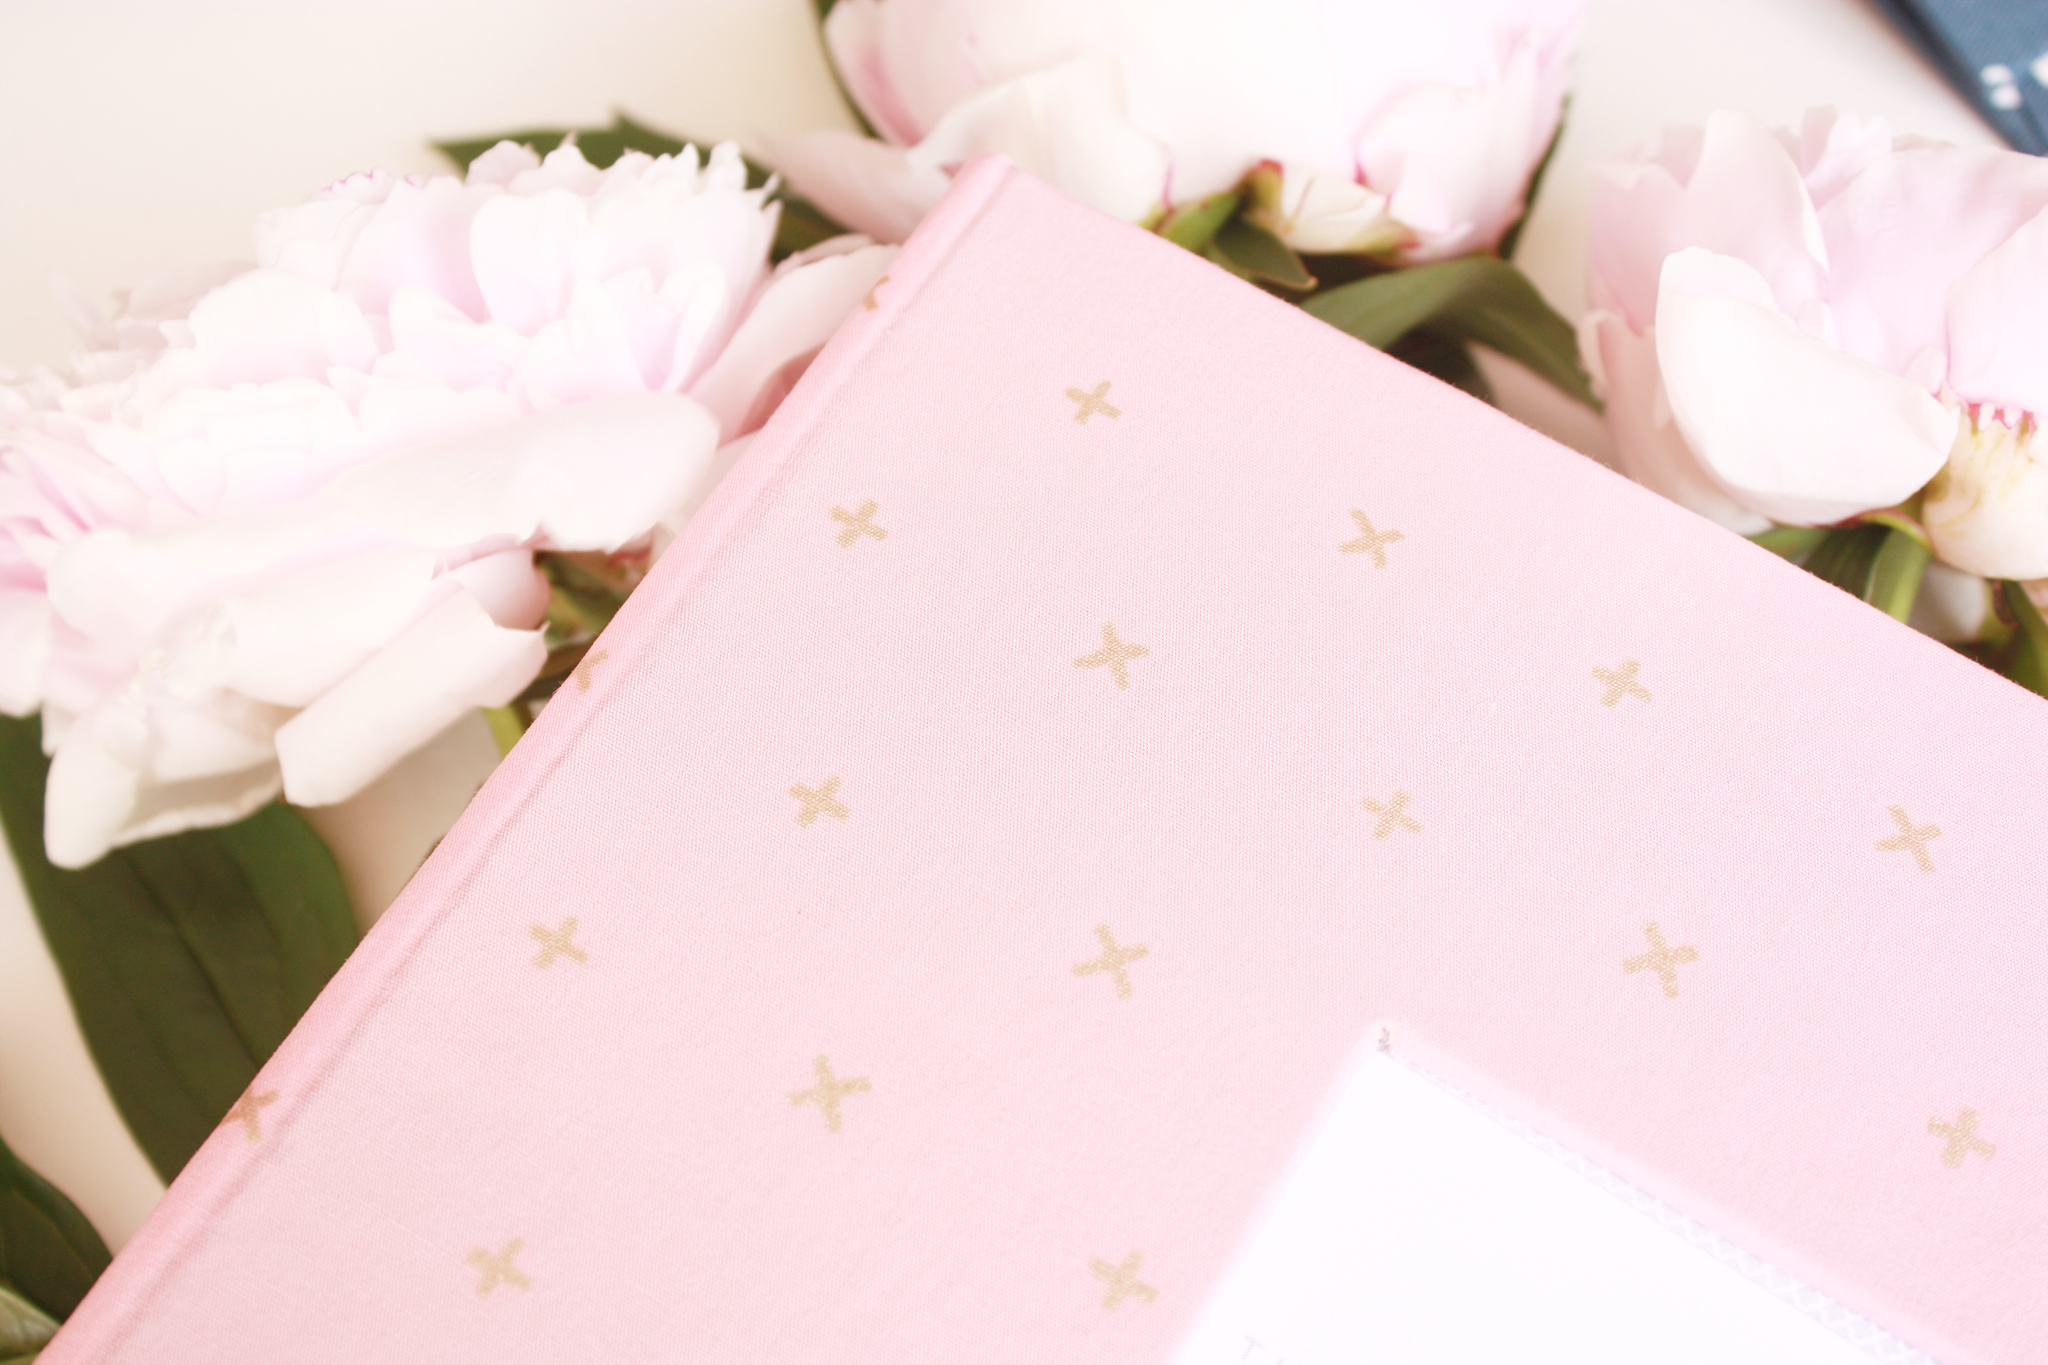 Rose Pink with Gold Criss Cross Modern Baby Book - Our Story Paper Co.